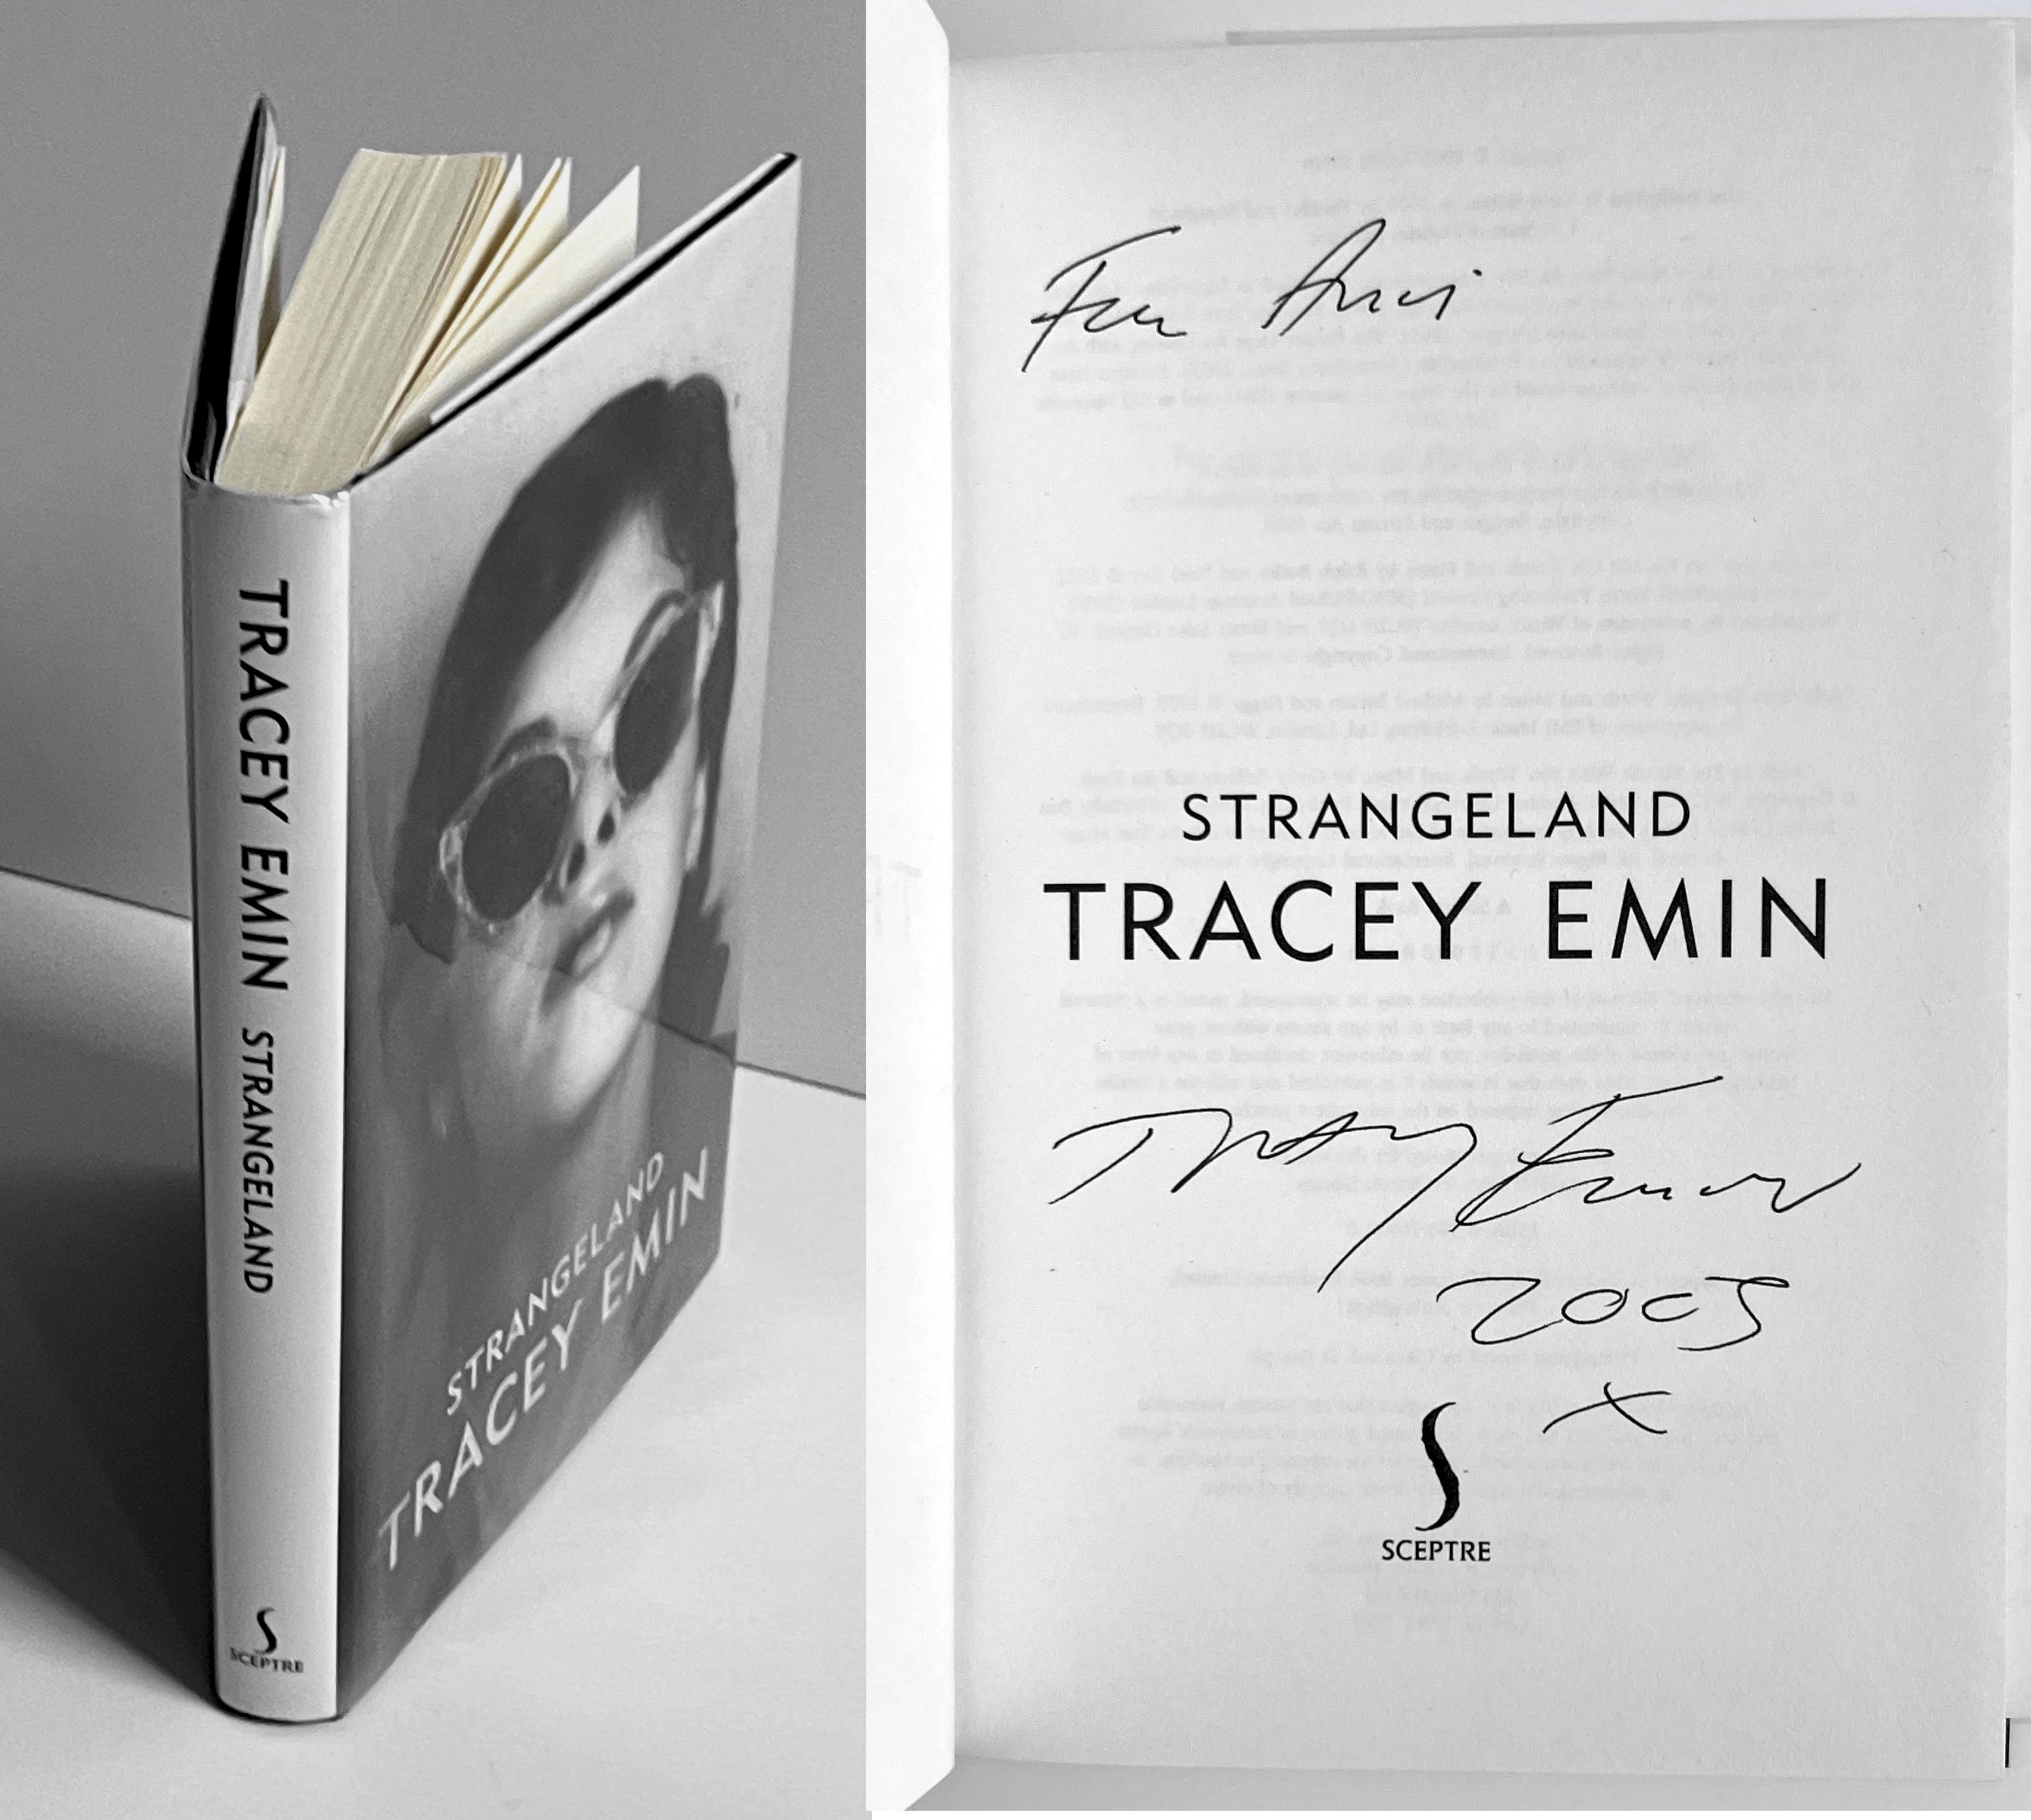 Monograph: Strangeland (Hand signed, dated and inscribed by Tracey Emin)